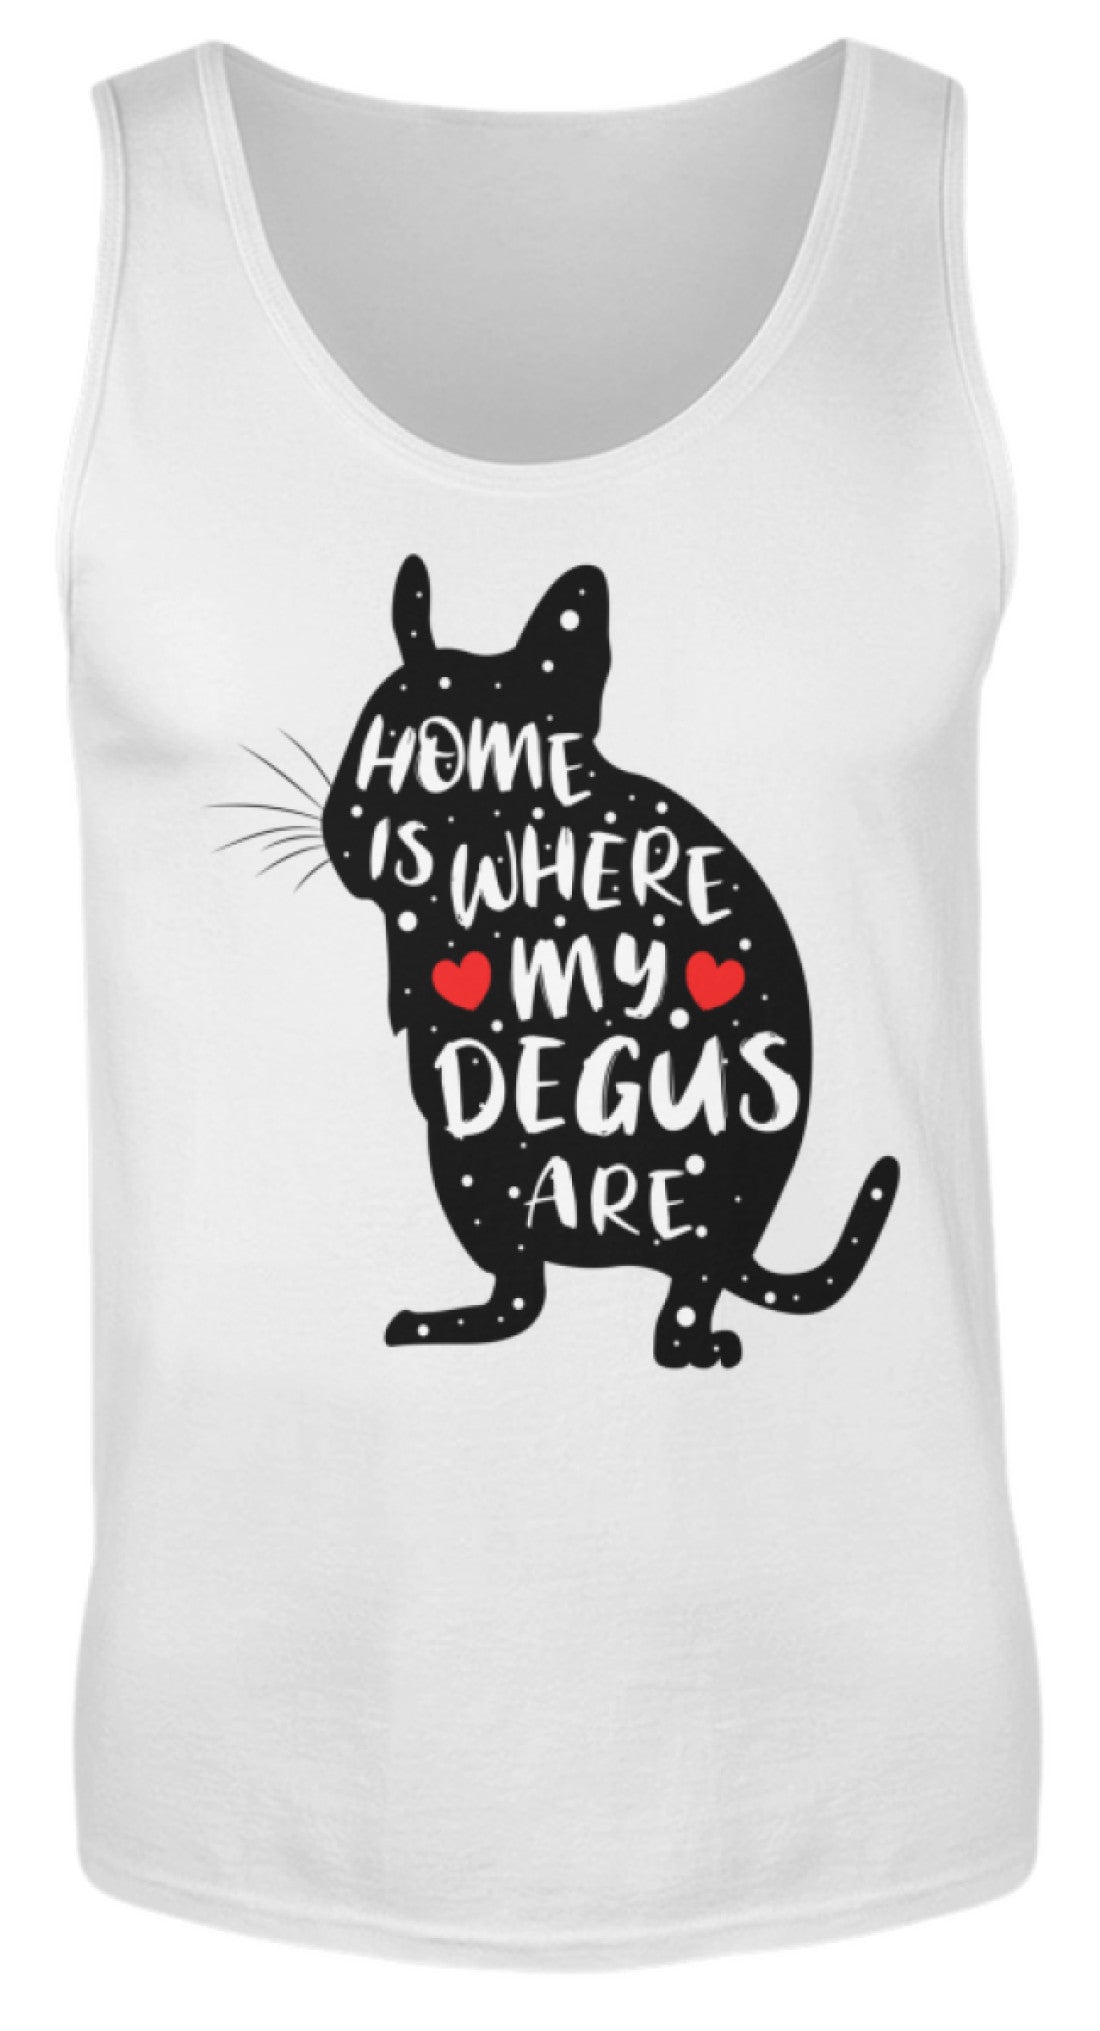 Zeigt funny adorable degu saying rodent herren tanktop 1 in Farbe Red